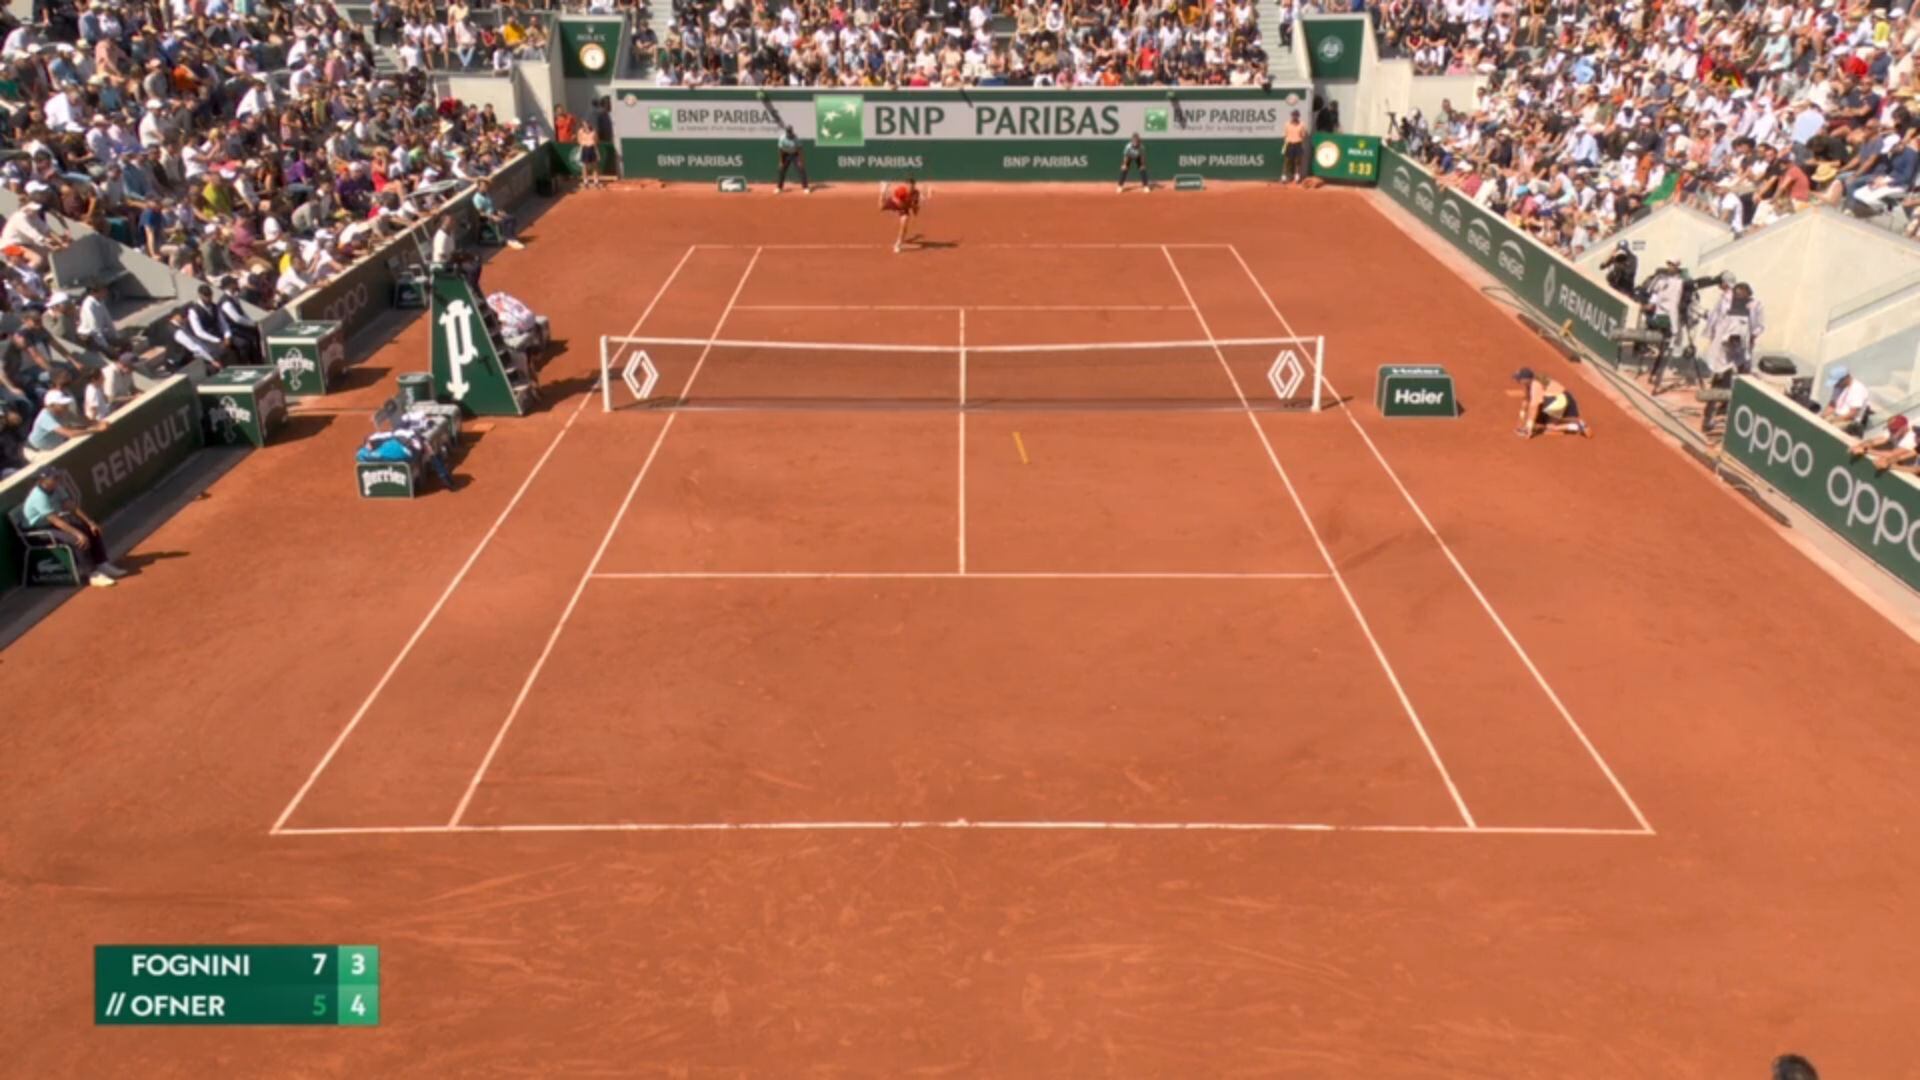 Fognini and Ofner have been playing the second set of their match.  (Photo: Capture Star Plus)